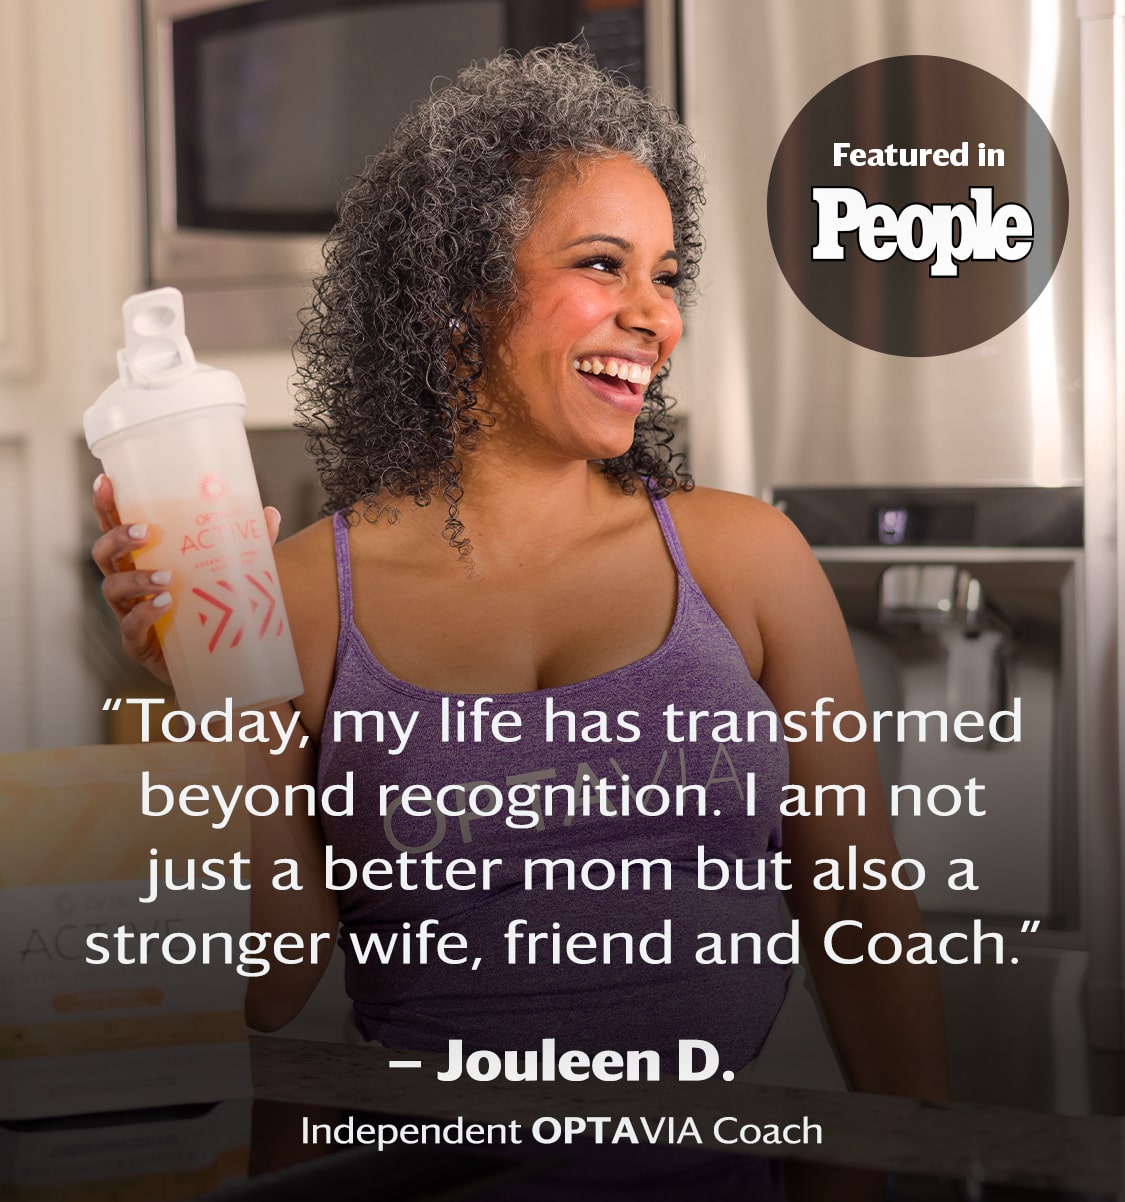 Today, my life has transformed beyond recognition. I am not just a better mom but also a stronger wife, friend and coach. Jouleen D., Independent Optavia Coach.